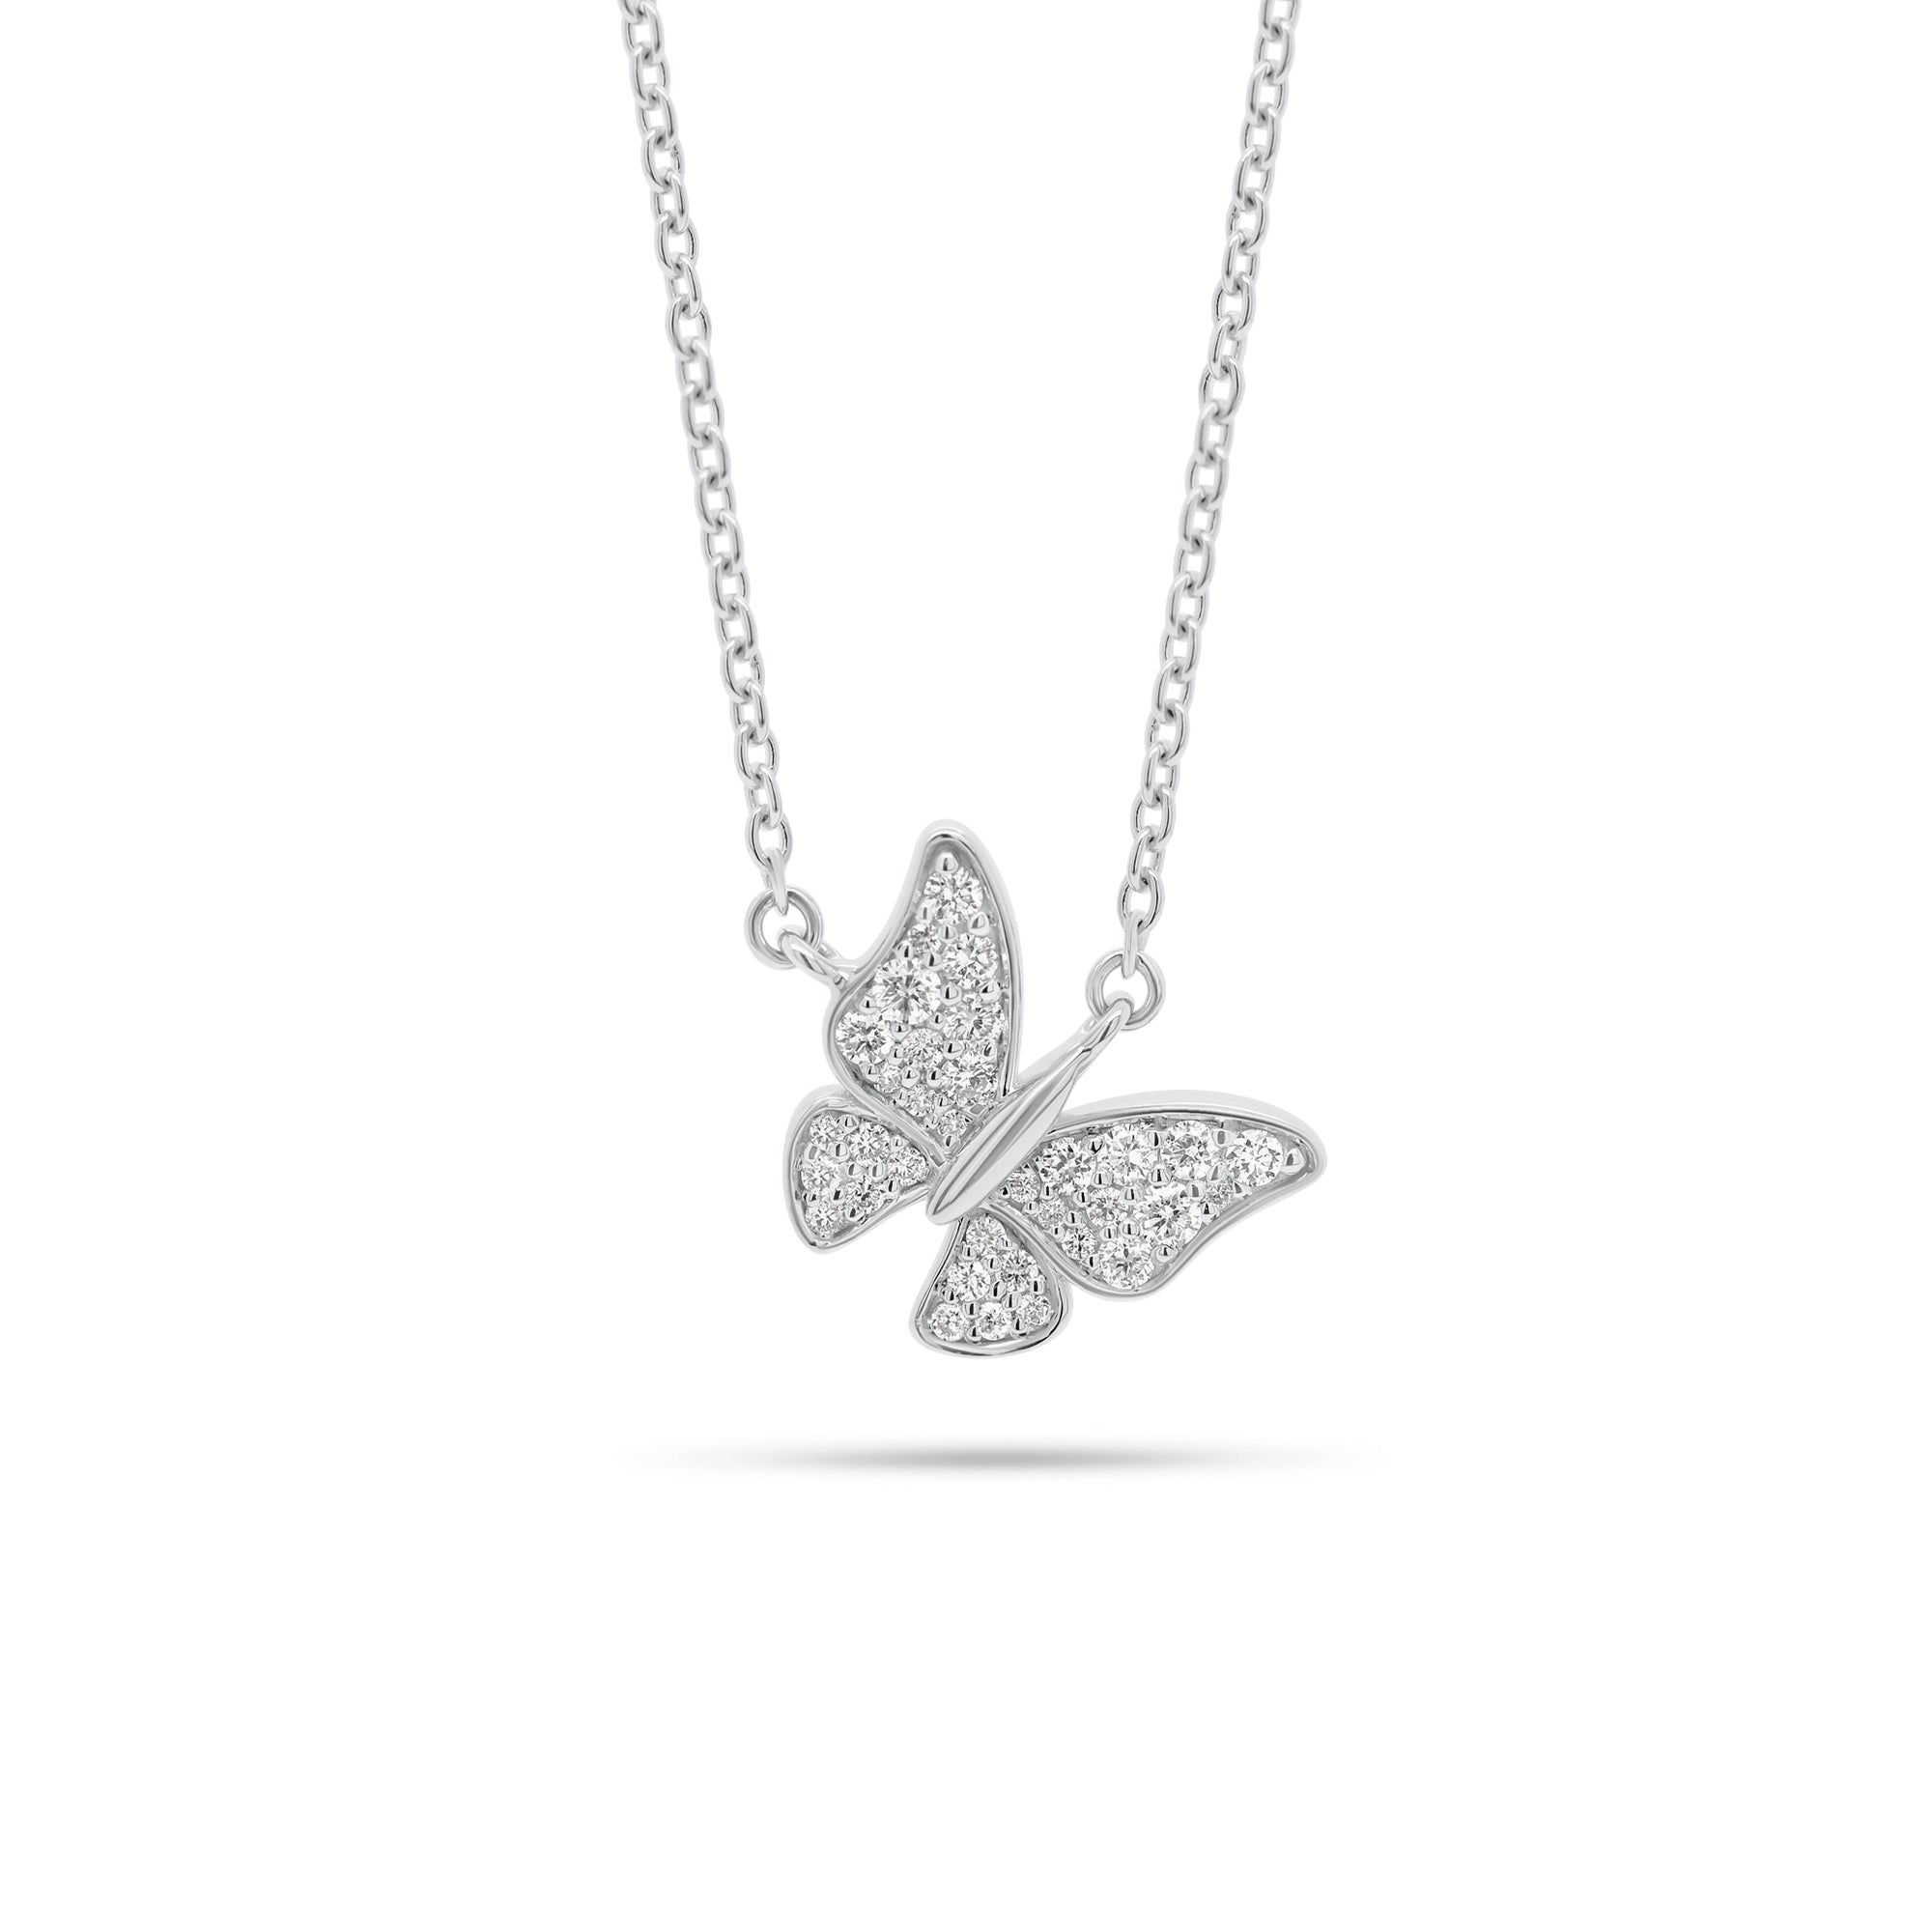 Pave Diamond Fluttery Butterfly Pendant Necklace - 14K gold weighing 5.10 grams  - 34 round diamonds weighing 0.37 carats